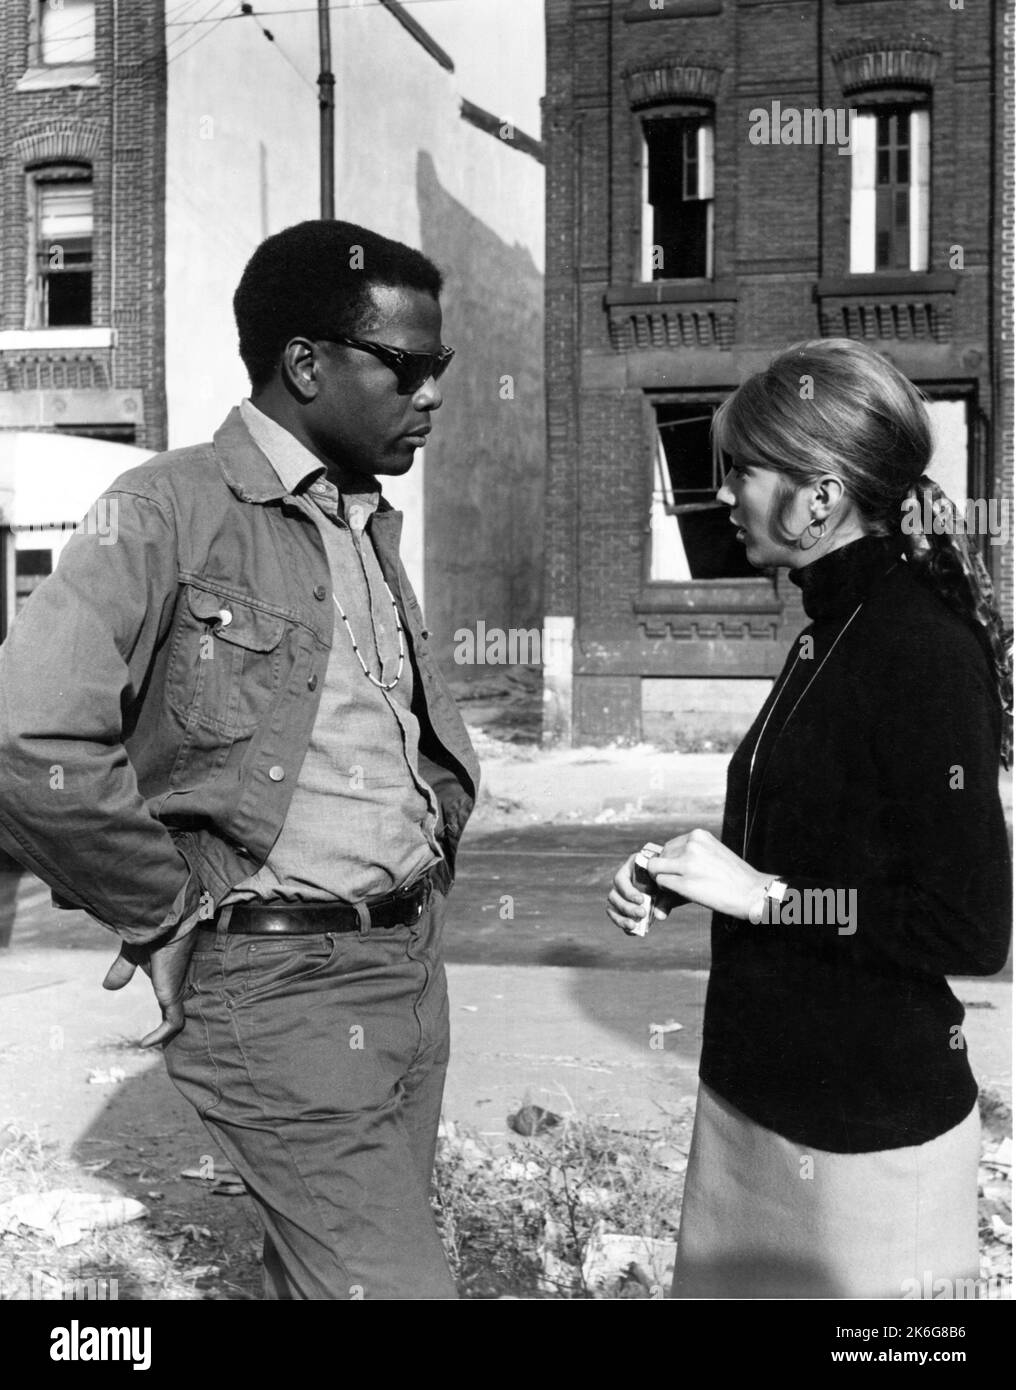 SIDNEY POITIER and JOANNA SHIMKUS in THE LOST MAN 1969 director / screenplay ROBERT ALAN AURTHUR based on the novel Odd Man Out by F.L. Green music Quincy Jones costume design Edith Head Universal Pictures Stock Photo